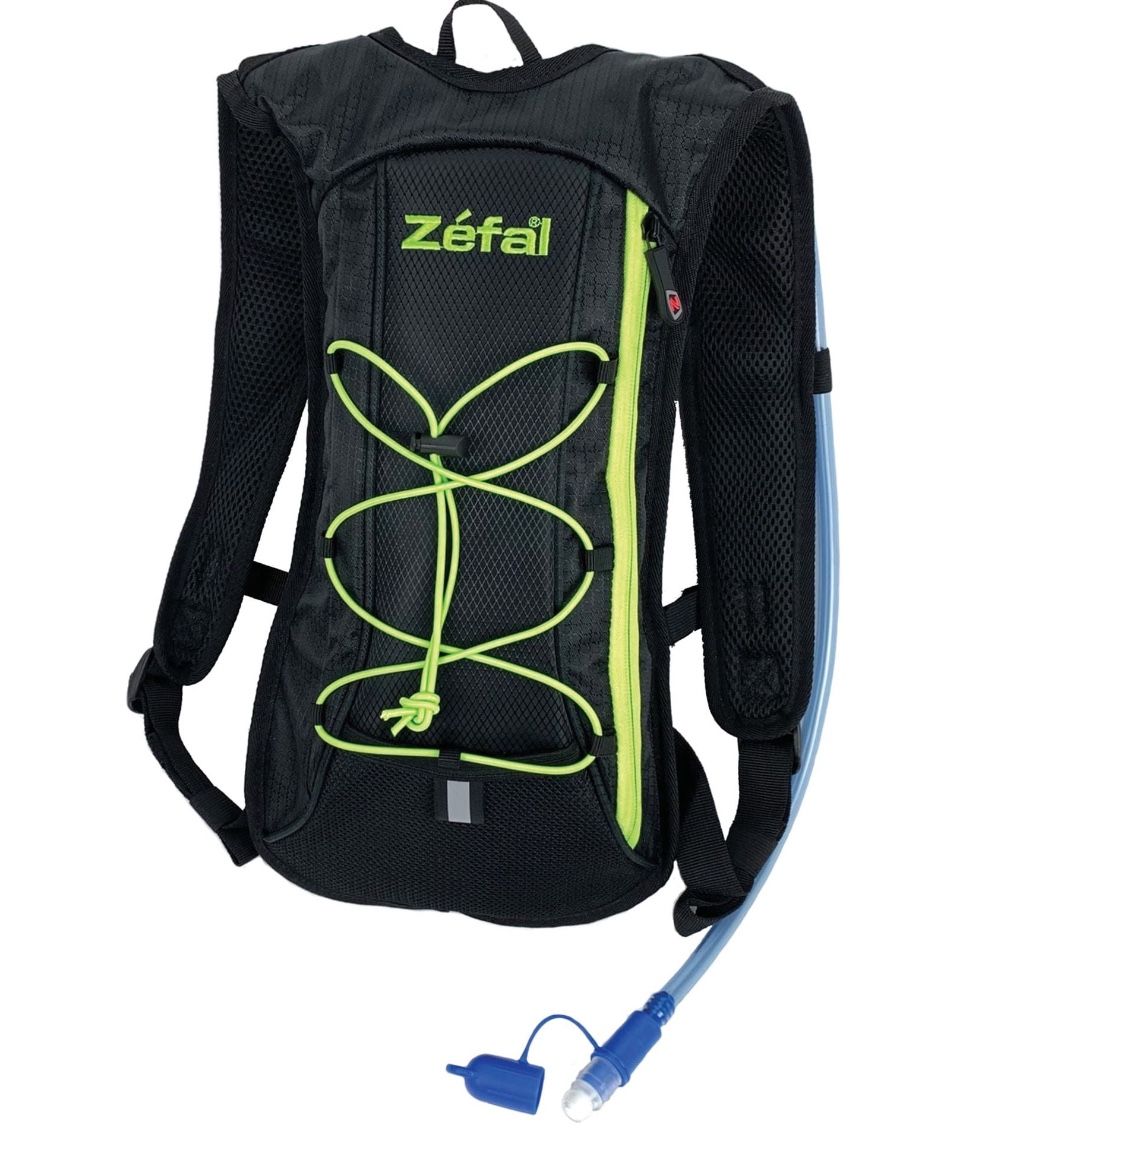 Zefal Outdoors 1.5 Liters Hydration Bag